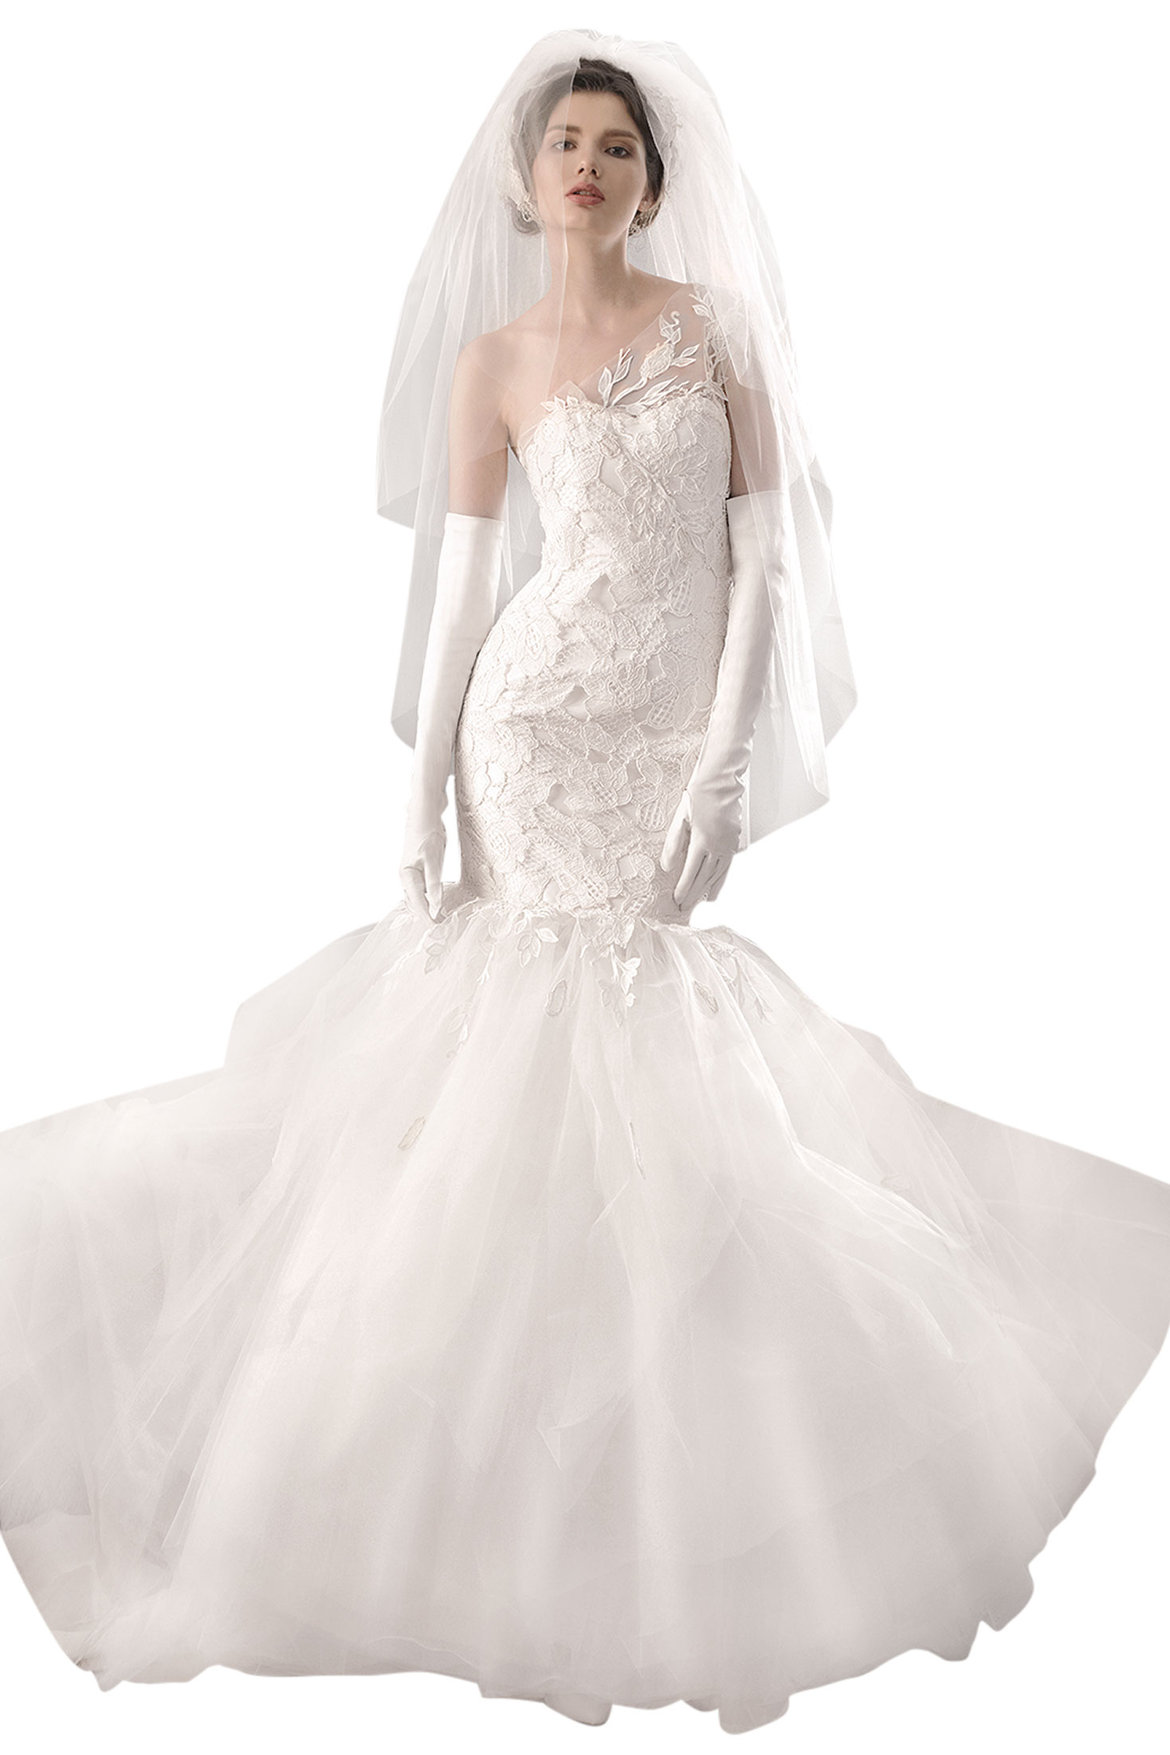 Best Wedding Dress for Your Body Type BridalGuide